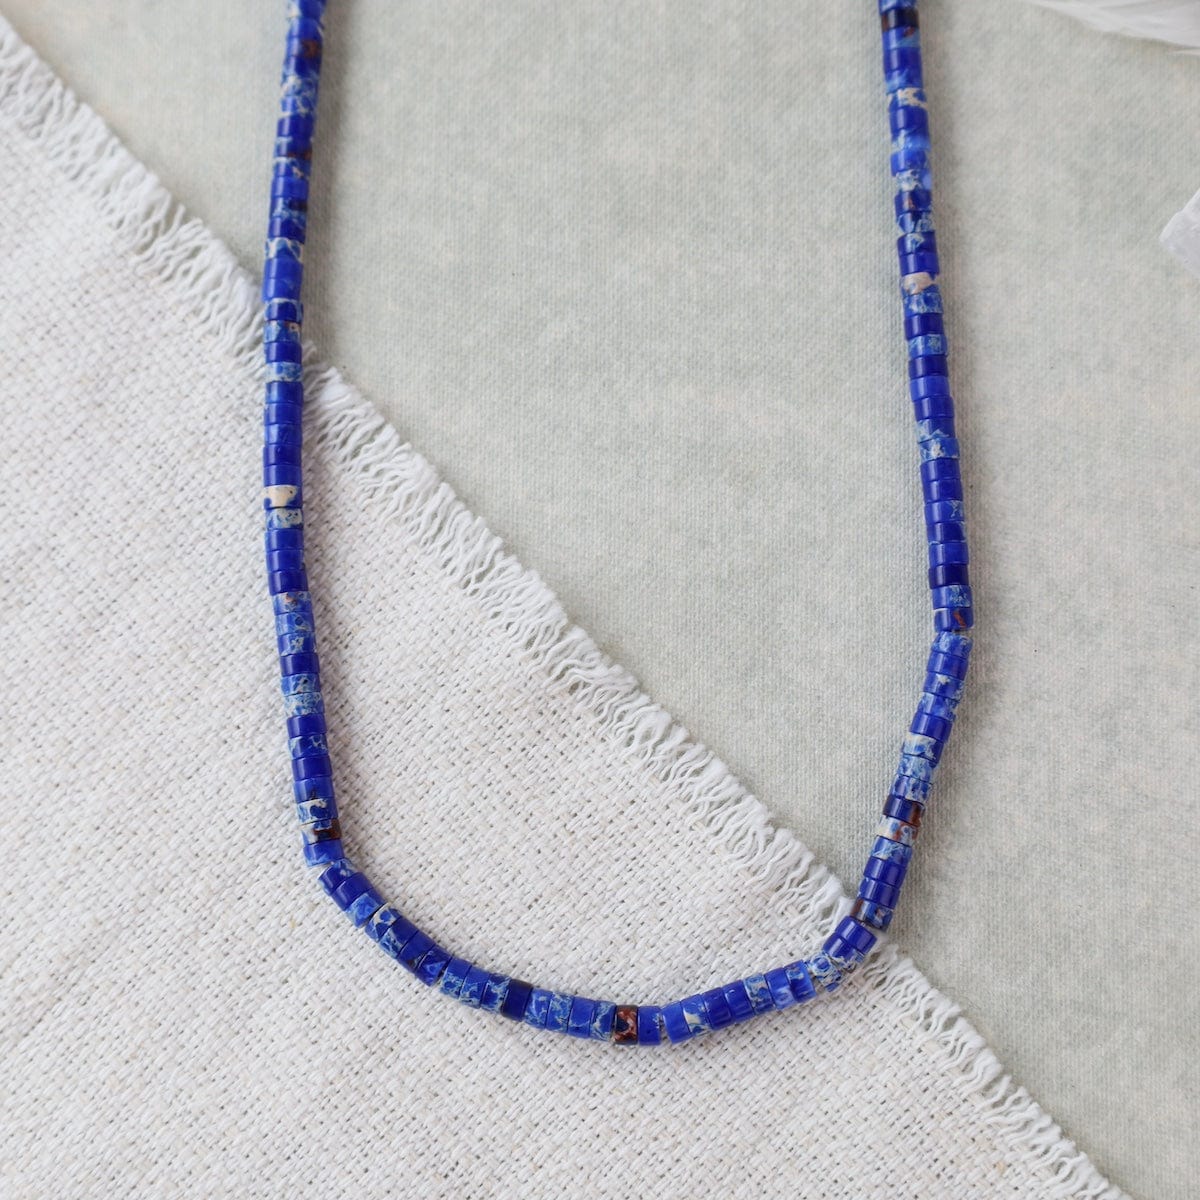 NKL-GPL PEARLY LAPIS // The Deep Blue Necklace - 18k gold